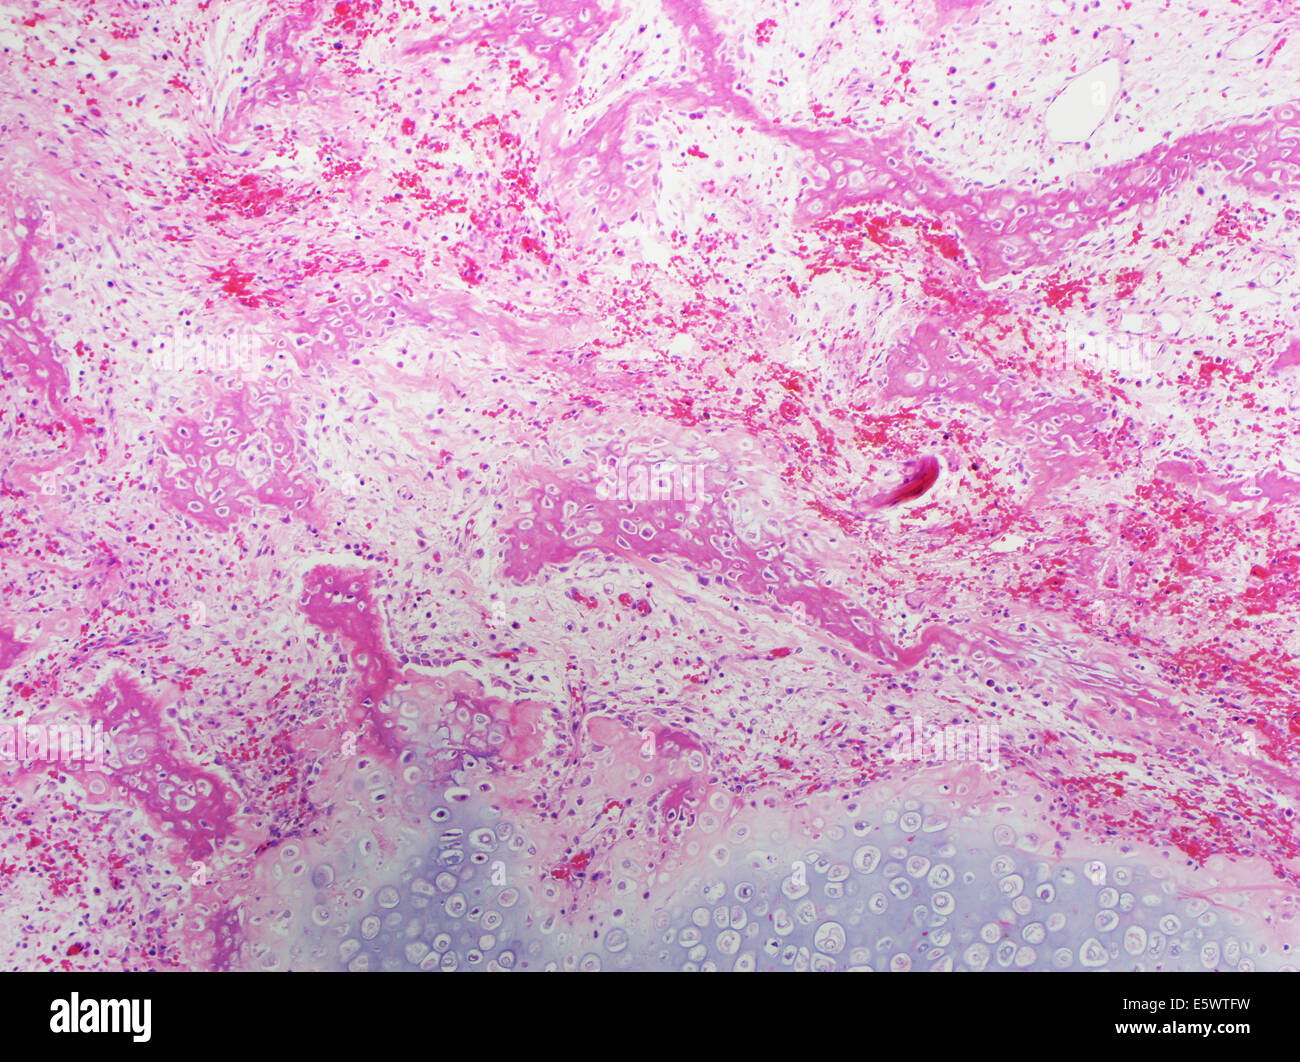 H&E stain, light microscopy, healing fracture callus with exuberant cartilage and new bone formation Stock Photo